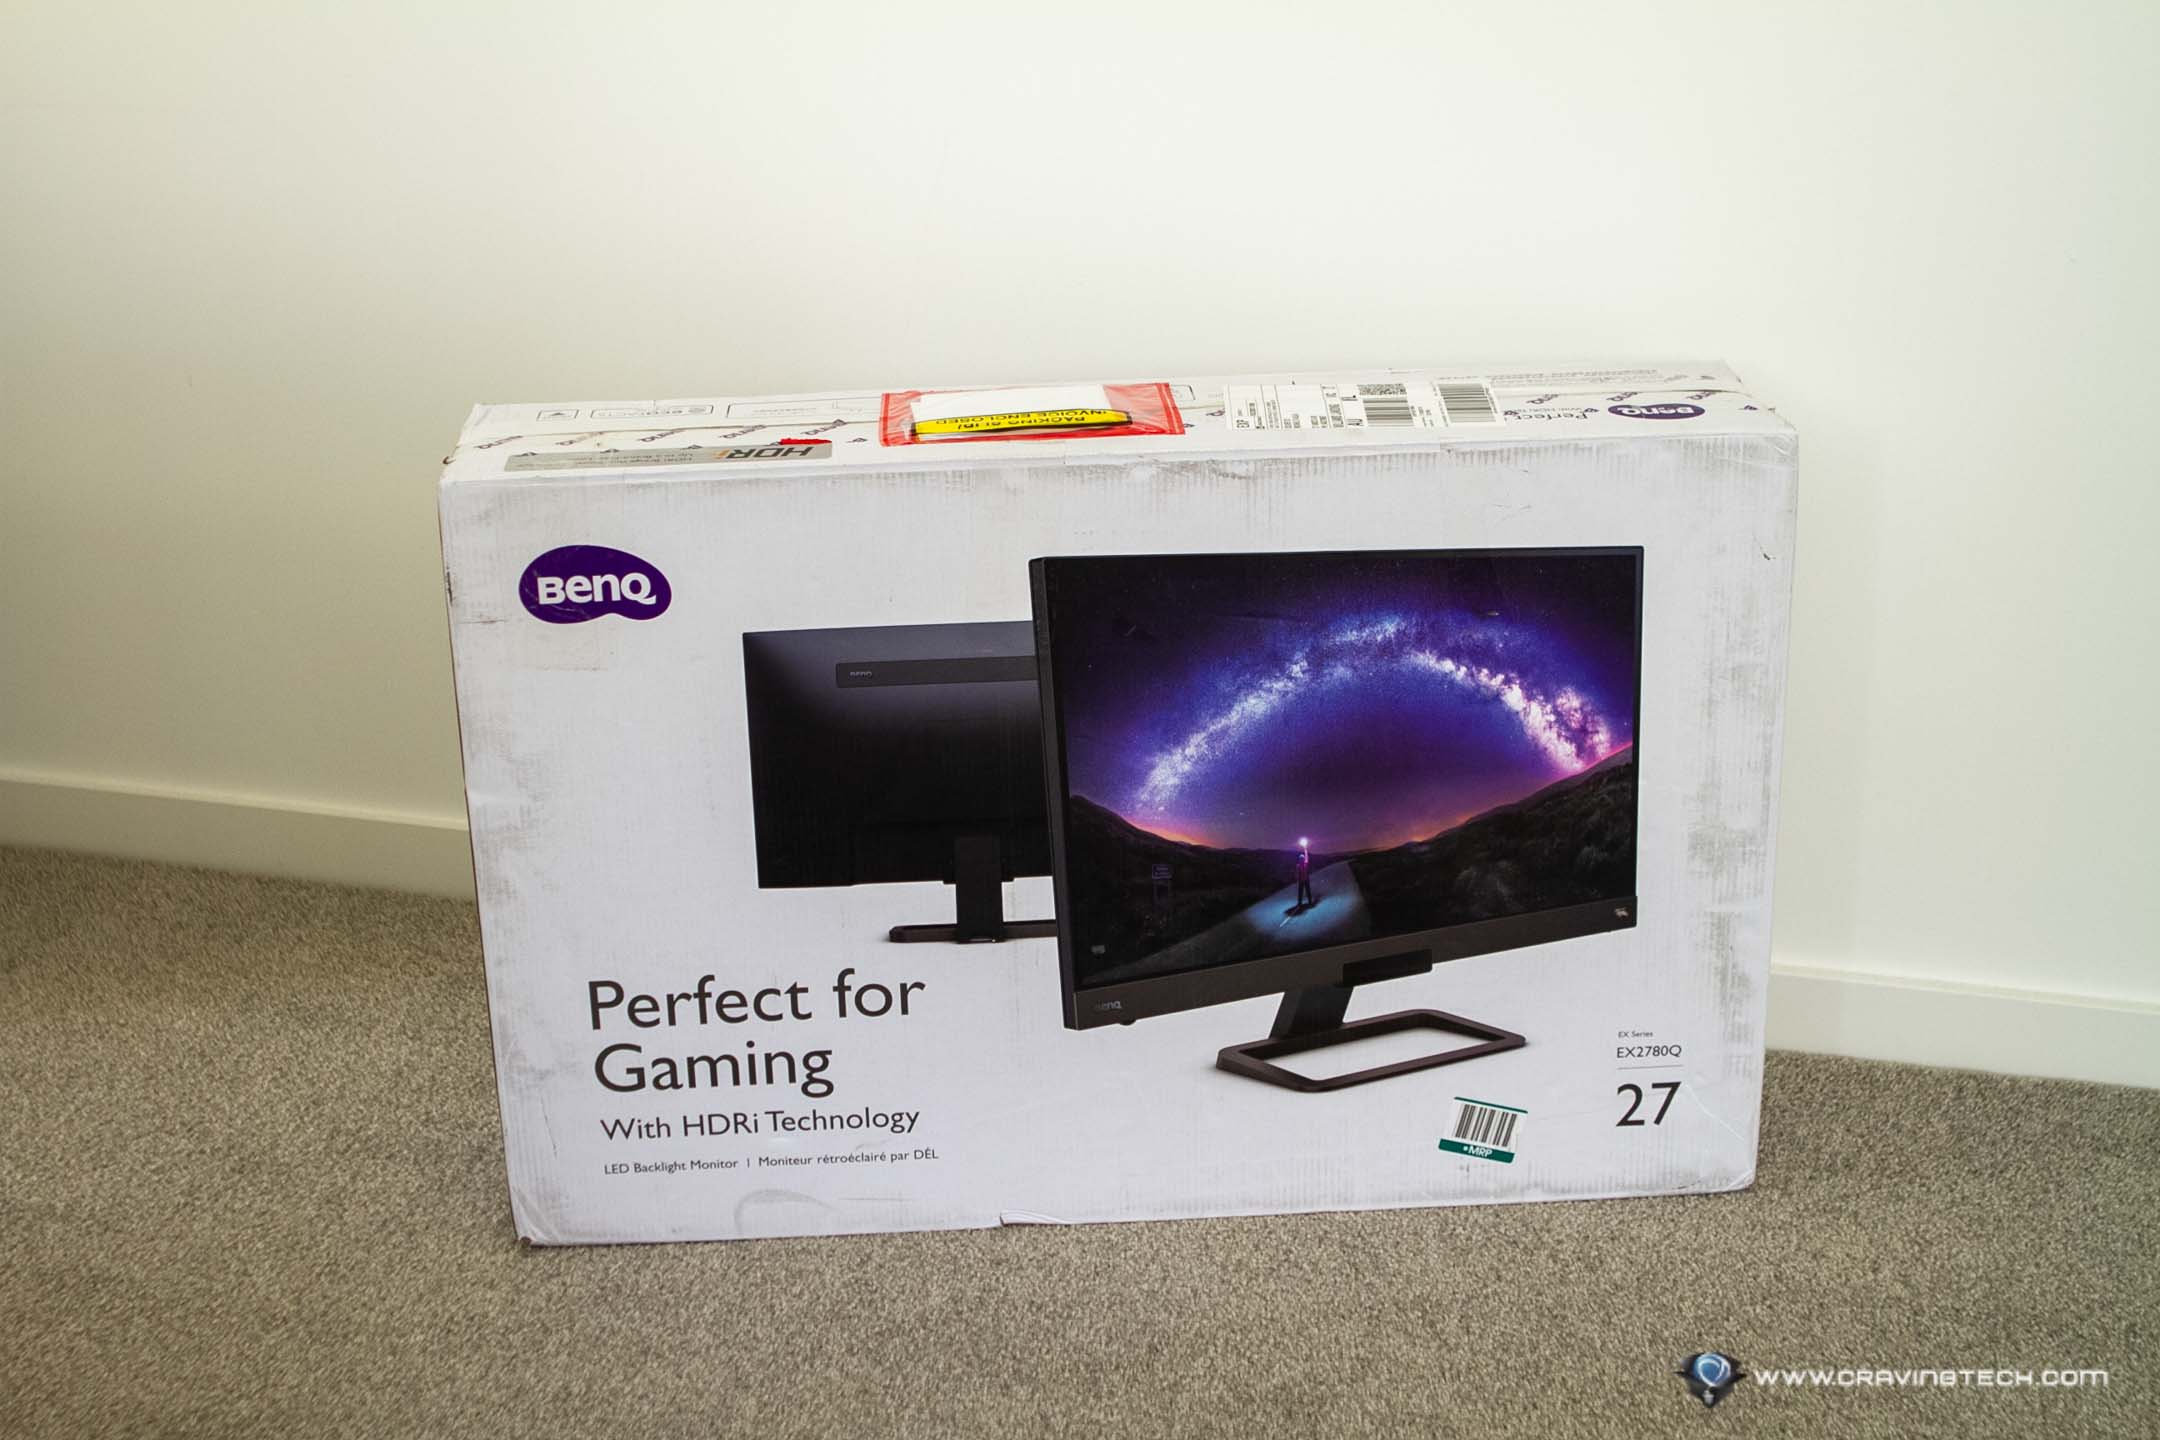 BenQ EX2780Q Gaming Monitor Review - An Awesome Gaming Monitor